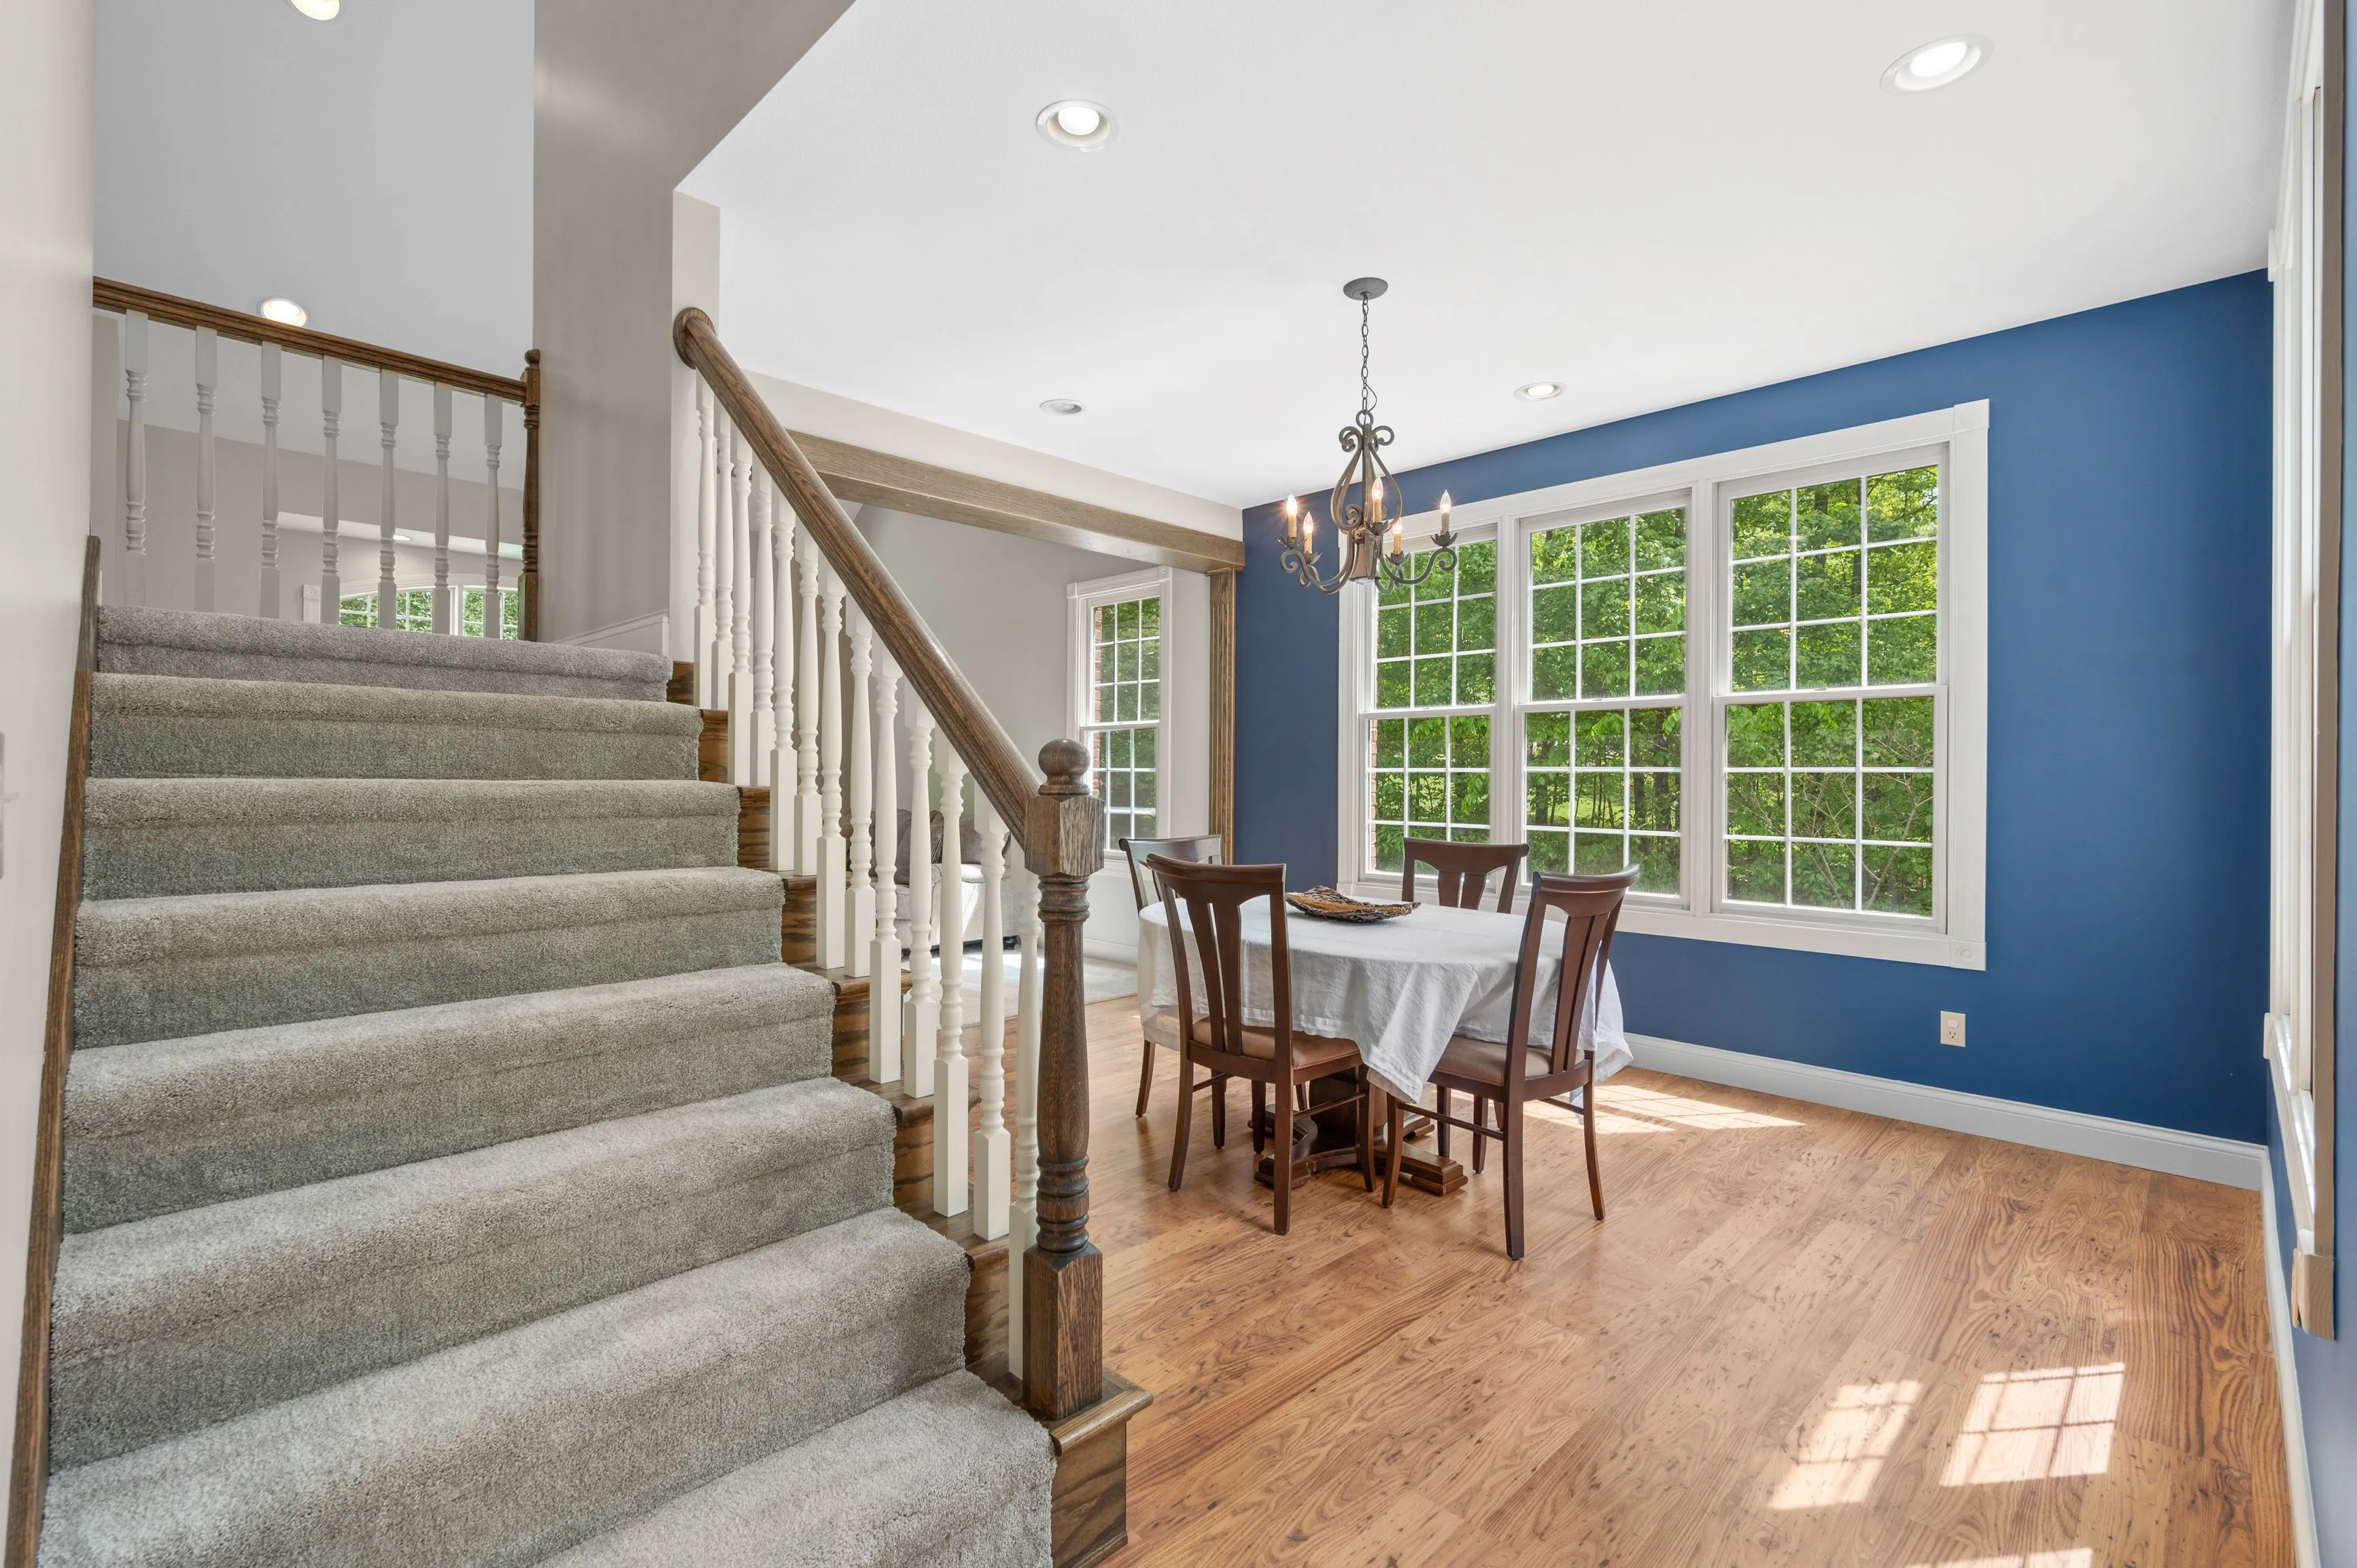 Elegant dining room with a blue accent wall, large windows, and a wooden table set adjacent to a staircase with white spindles and wooden banister.